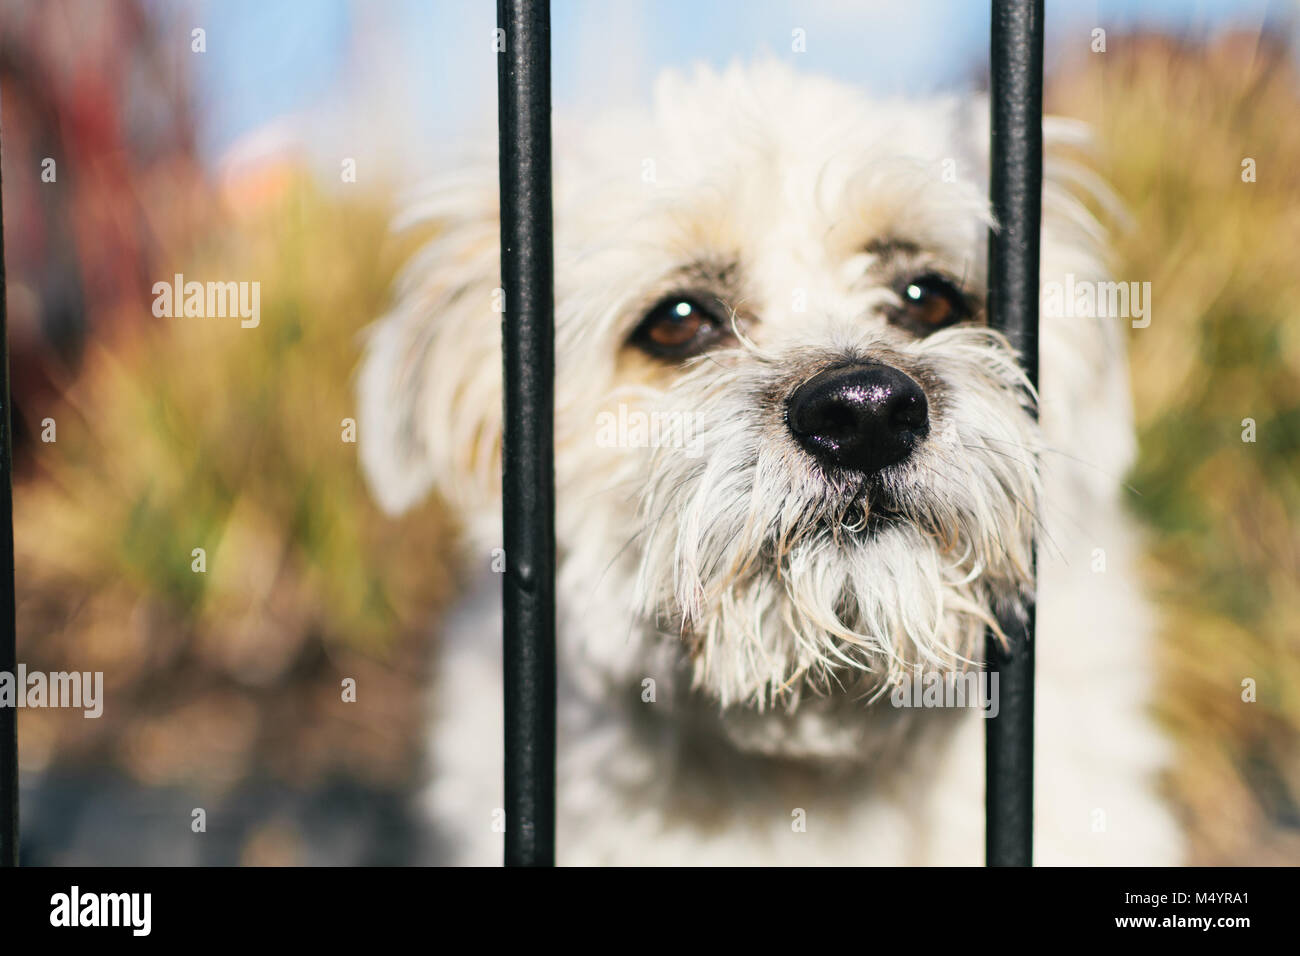 A small white dog pokes his wet nose through the iron bars of fence, as though imprisoned, over a blurred background of colourful garden shrubs. Stock Photo